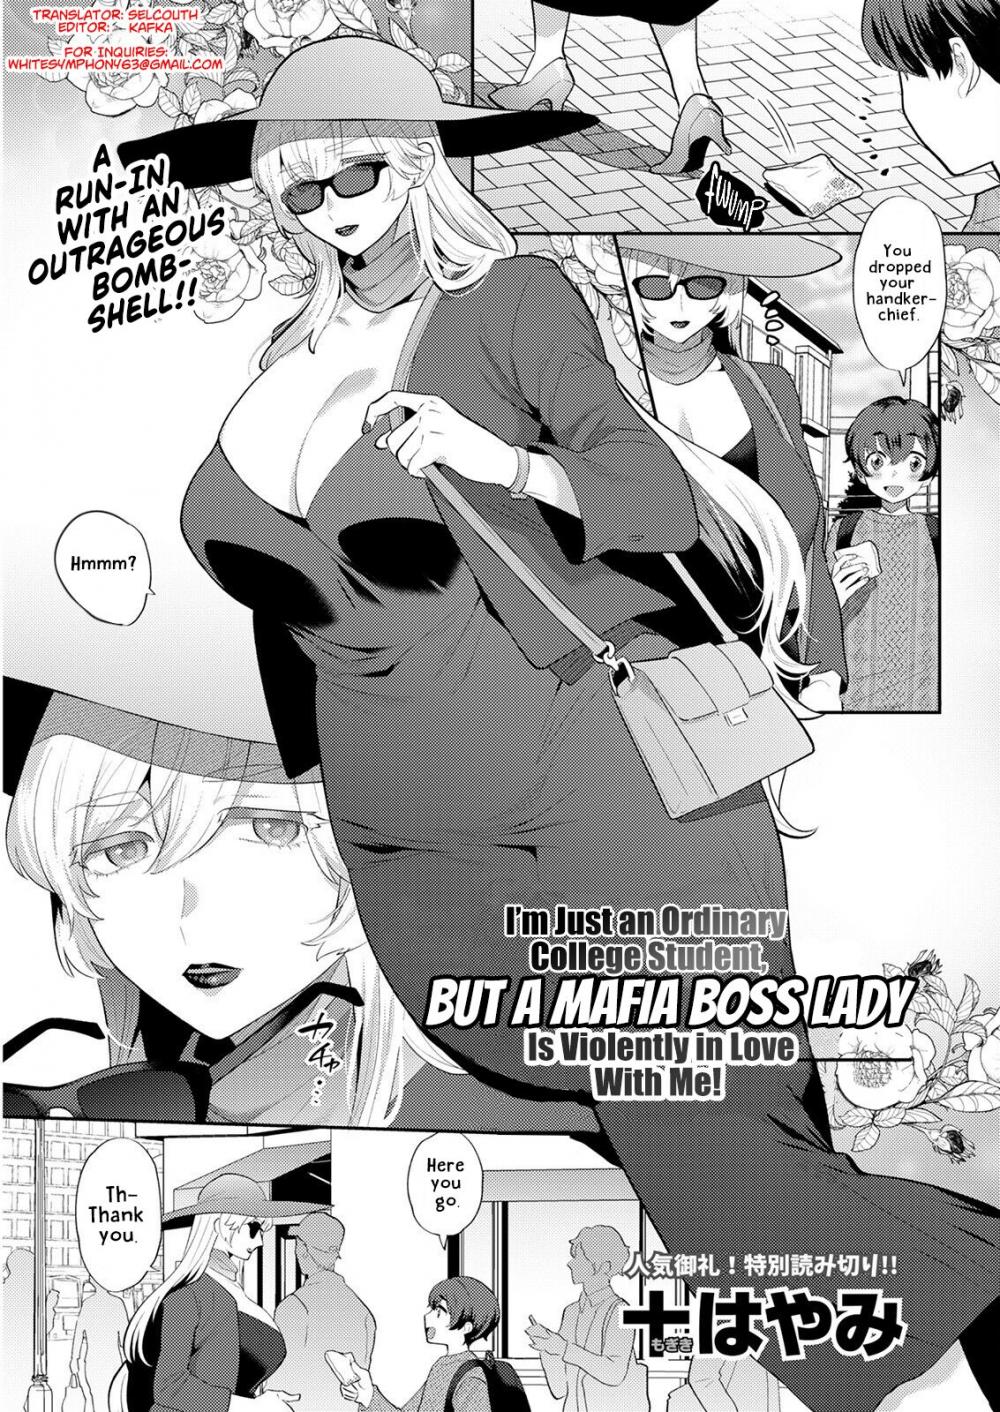 Hentai Manga Comic-I'm Just an Ordinary College Student, but a Mafia Boss Lady Is Violently in Love with Me!-Read-1